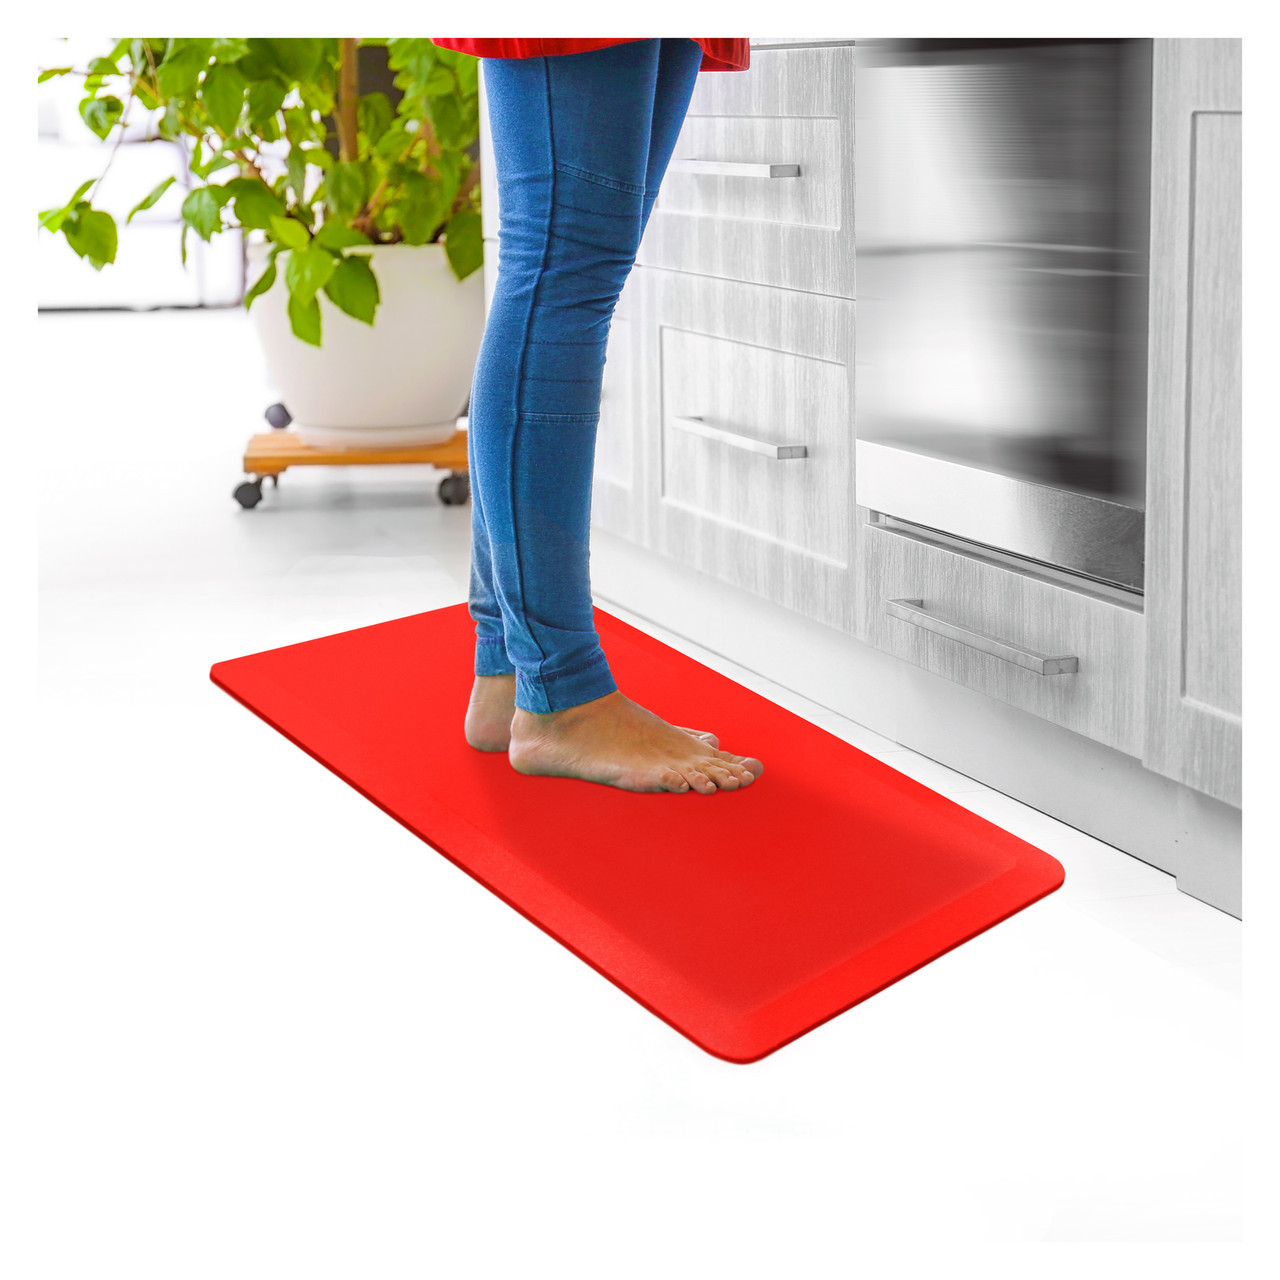 https://cdn11.bigcommerce.com/s-fjwps1jbkv/images/stencil/1280x1280/products/161/3796/ultralux-premium-anti-fatigue-floor-comfort-mat-or-durable-ergonomic-multi-purpose-non-slip-standing-support-pad-or-34-thick-or-red__22230.1688995005.jpg?c=2?imbypass=on